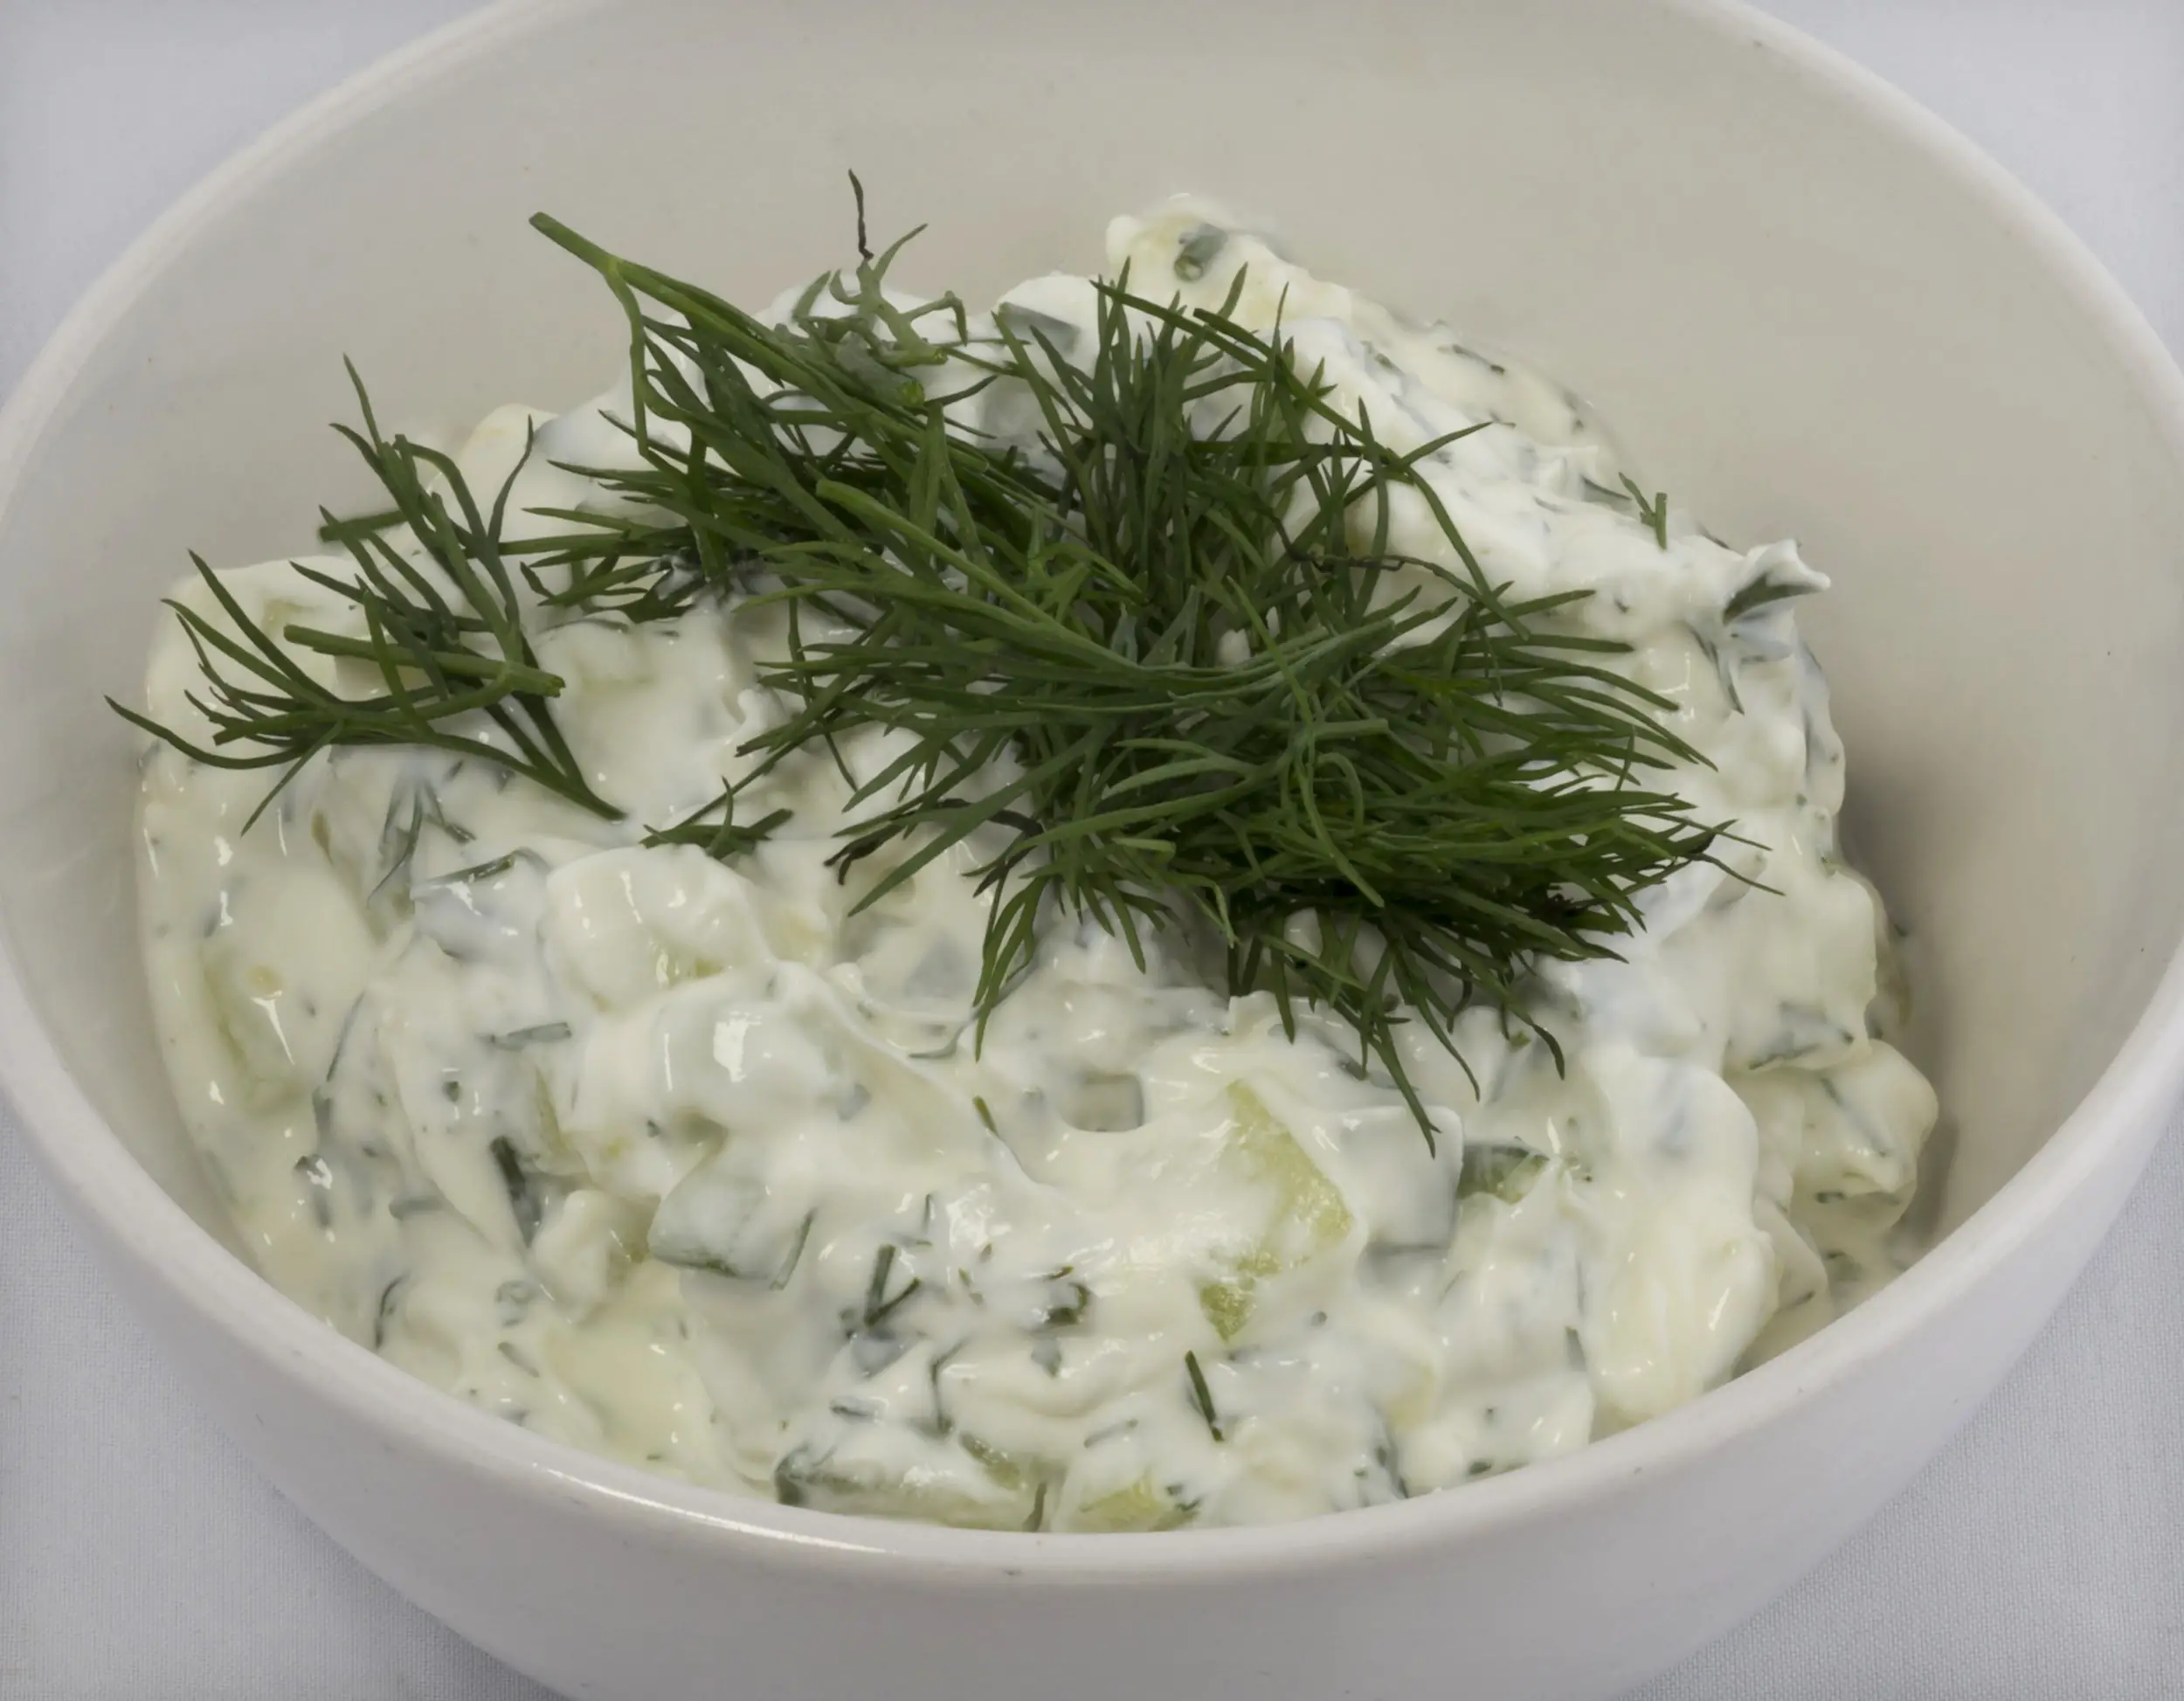 cold appetizers for white wine tasting - tzatziki